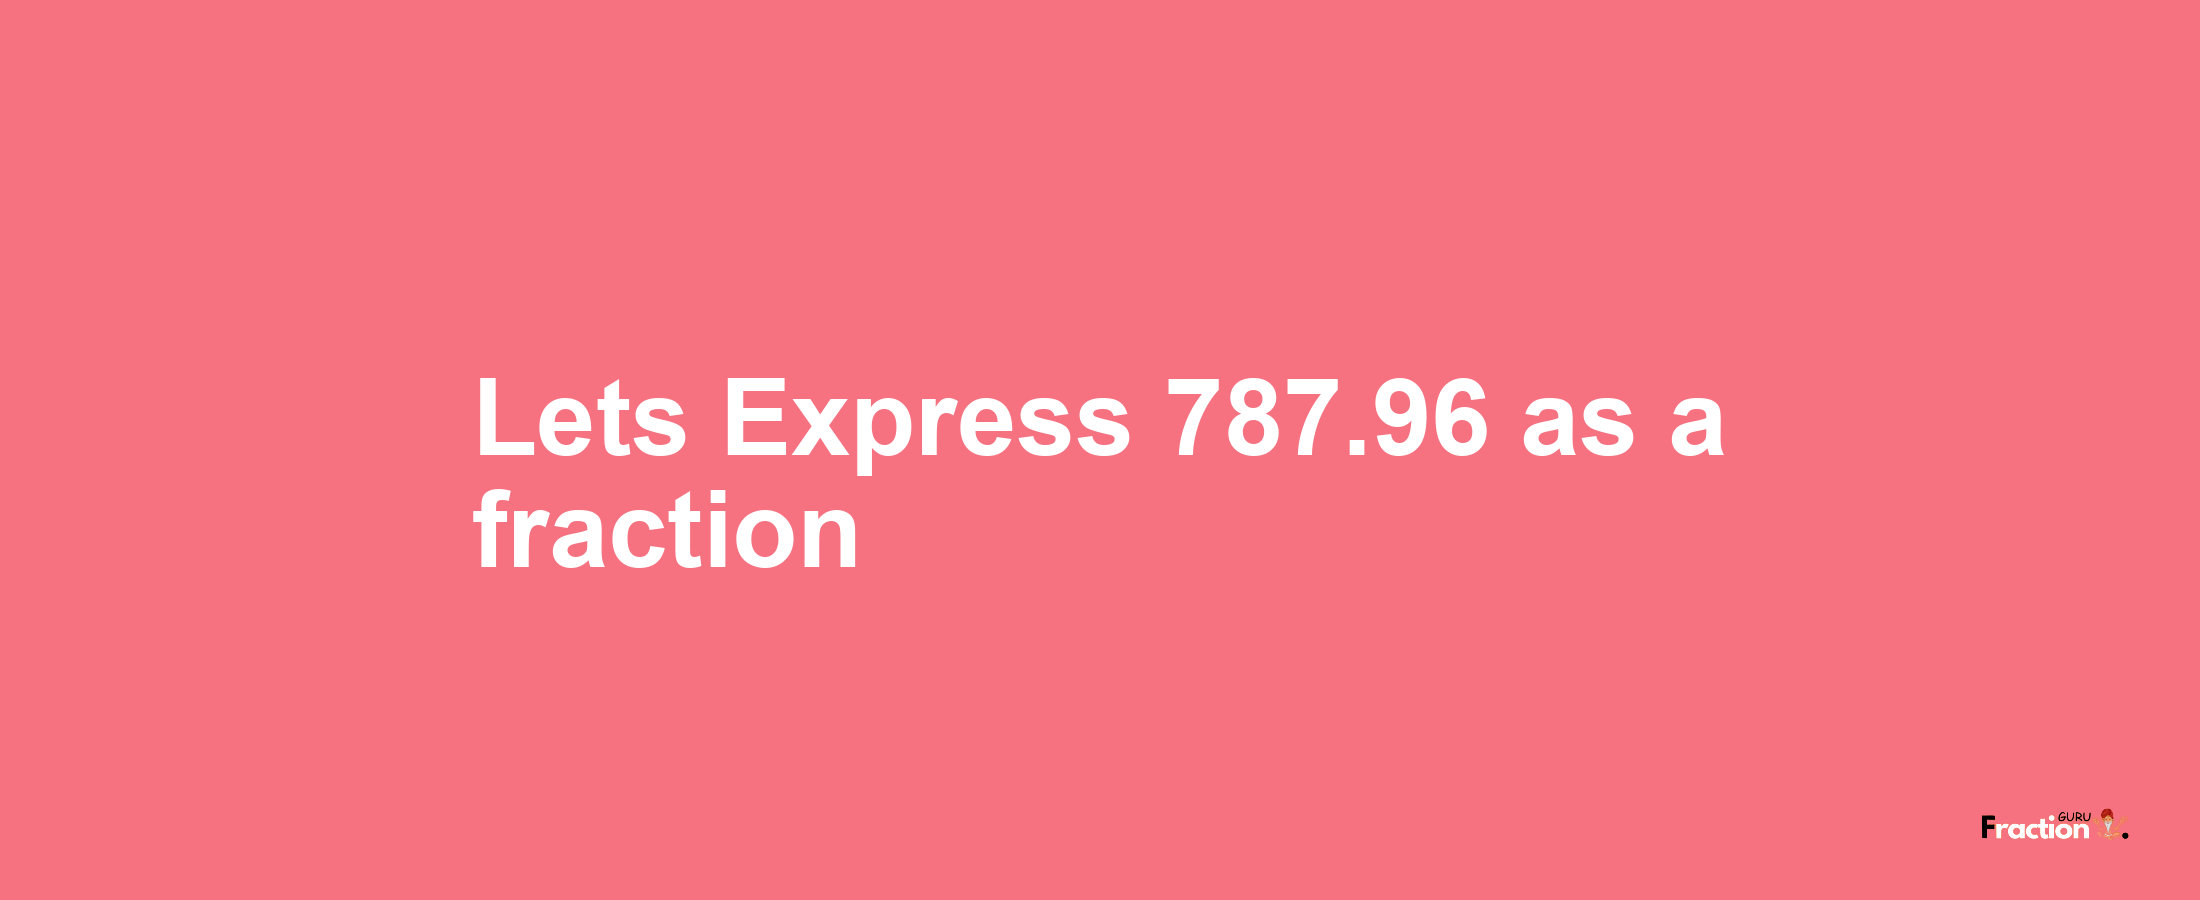 Lets Express 787.96 as afraction